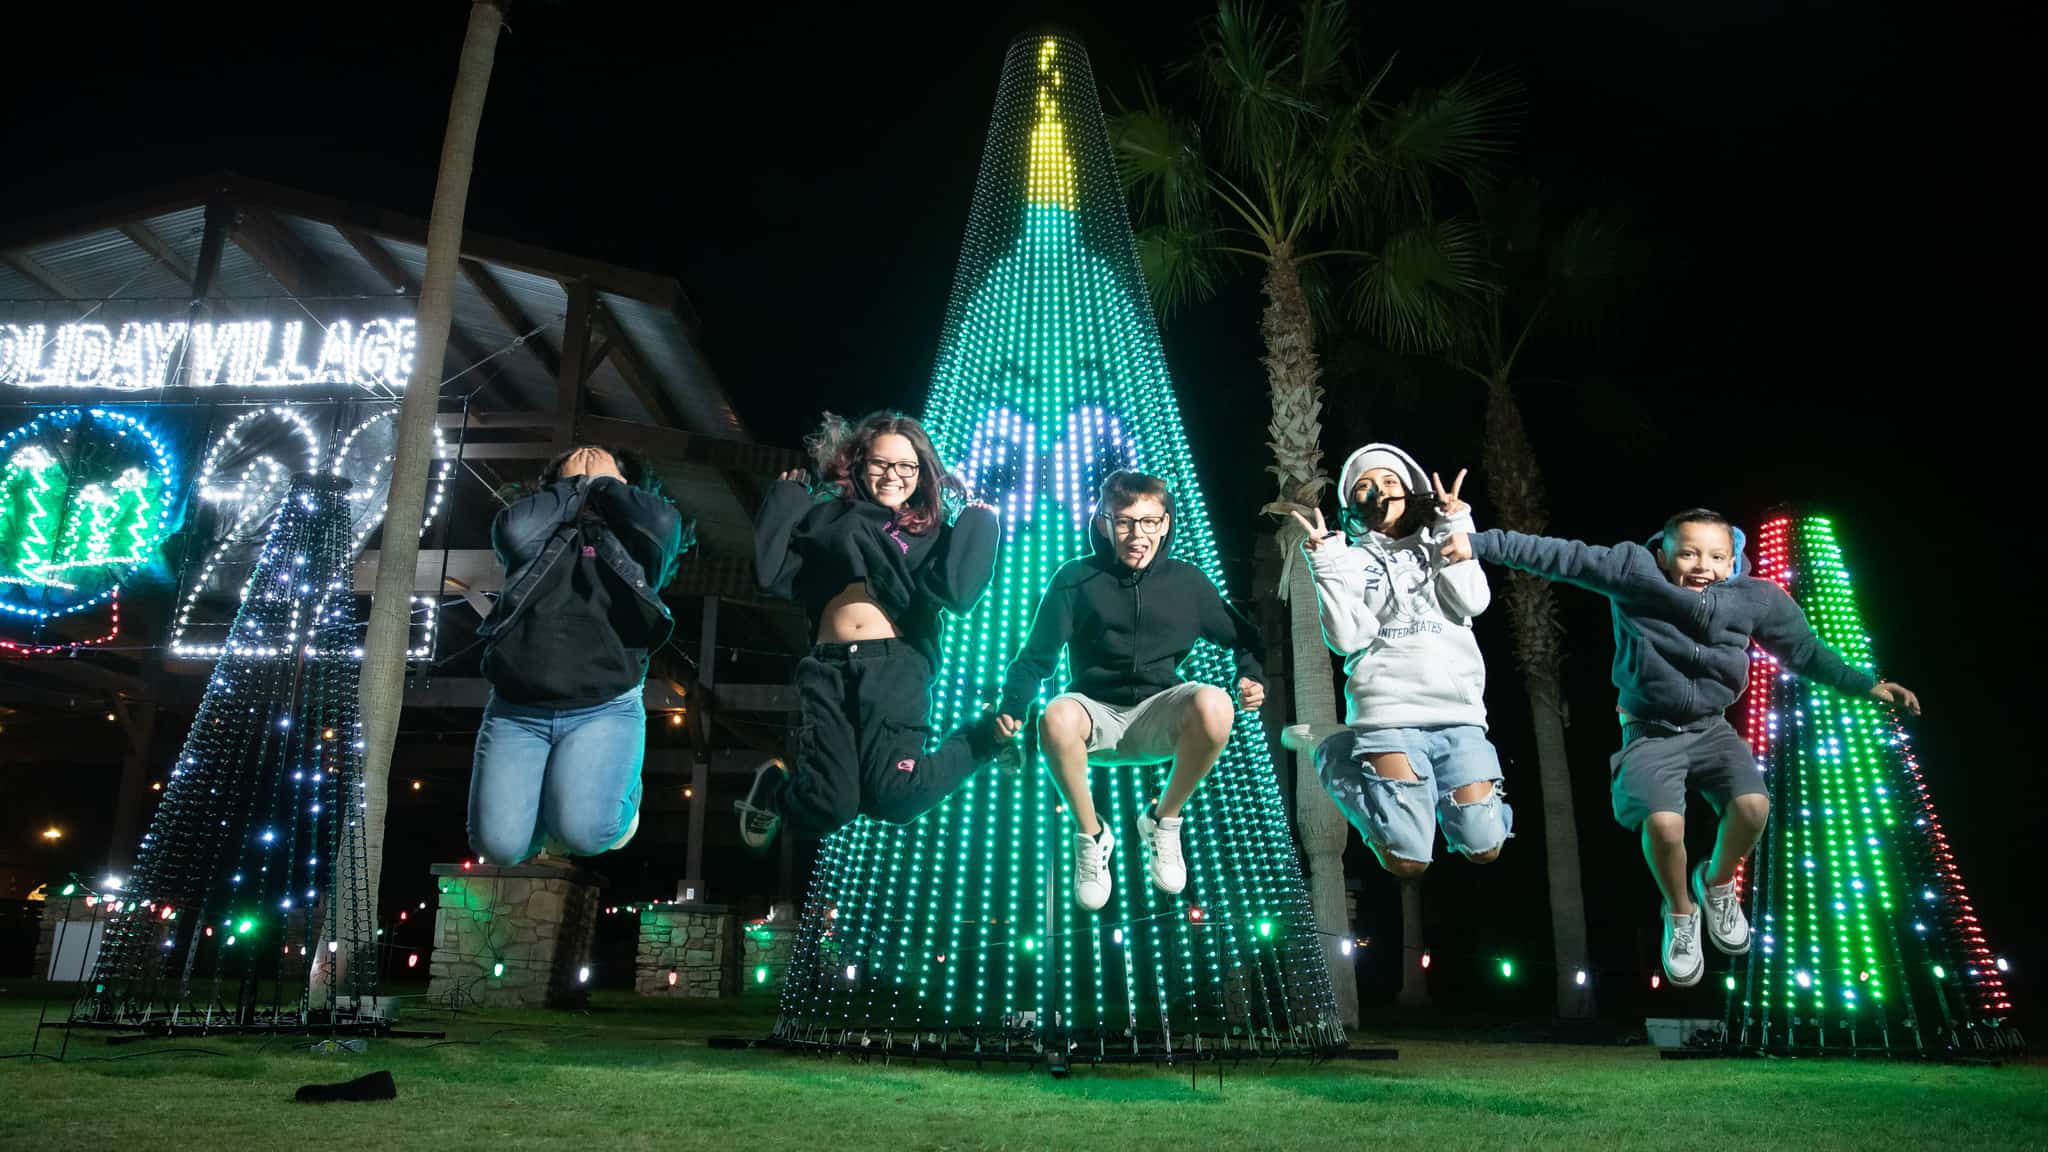 kids jumping in front of illuminated Christmas light display at night